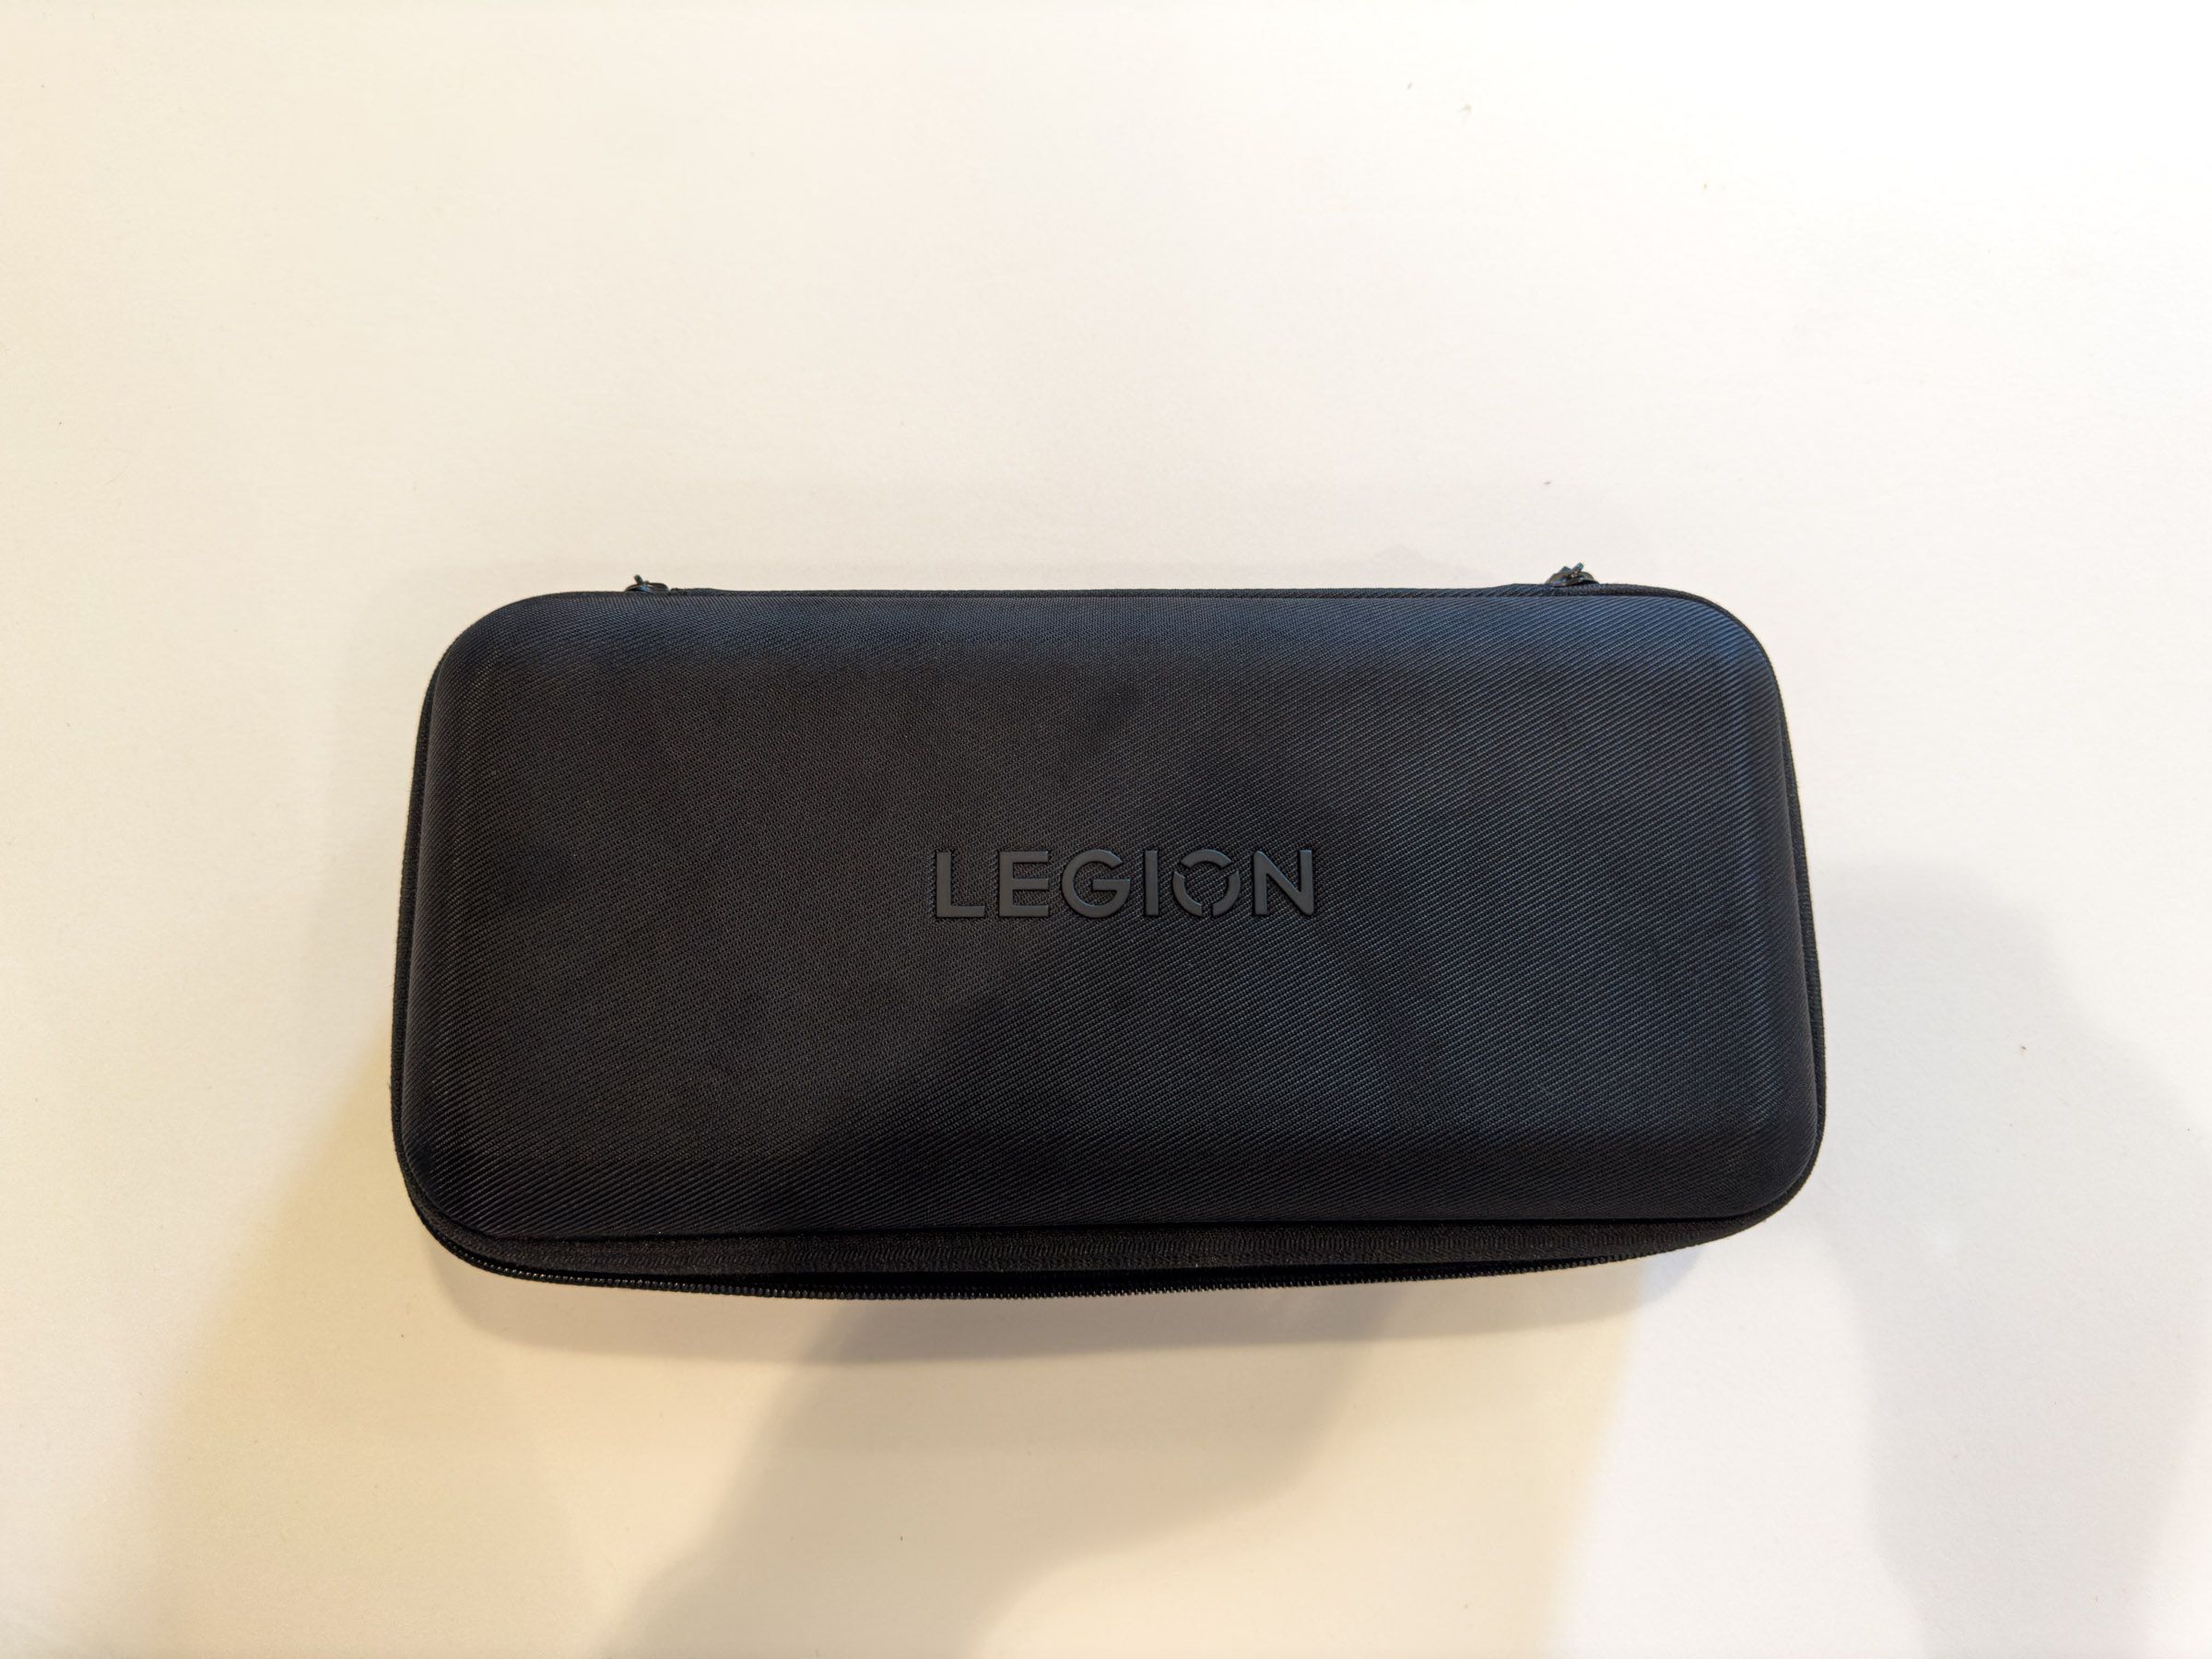 The Legion case seen from above on a white table.